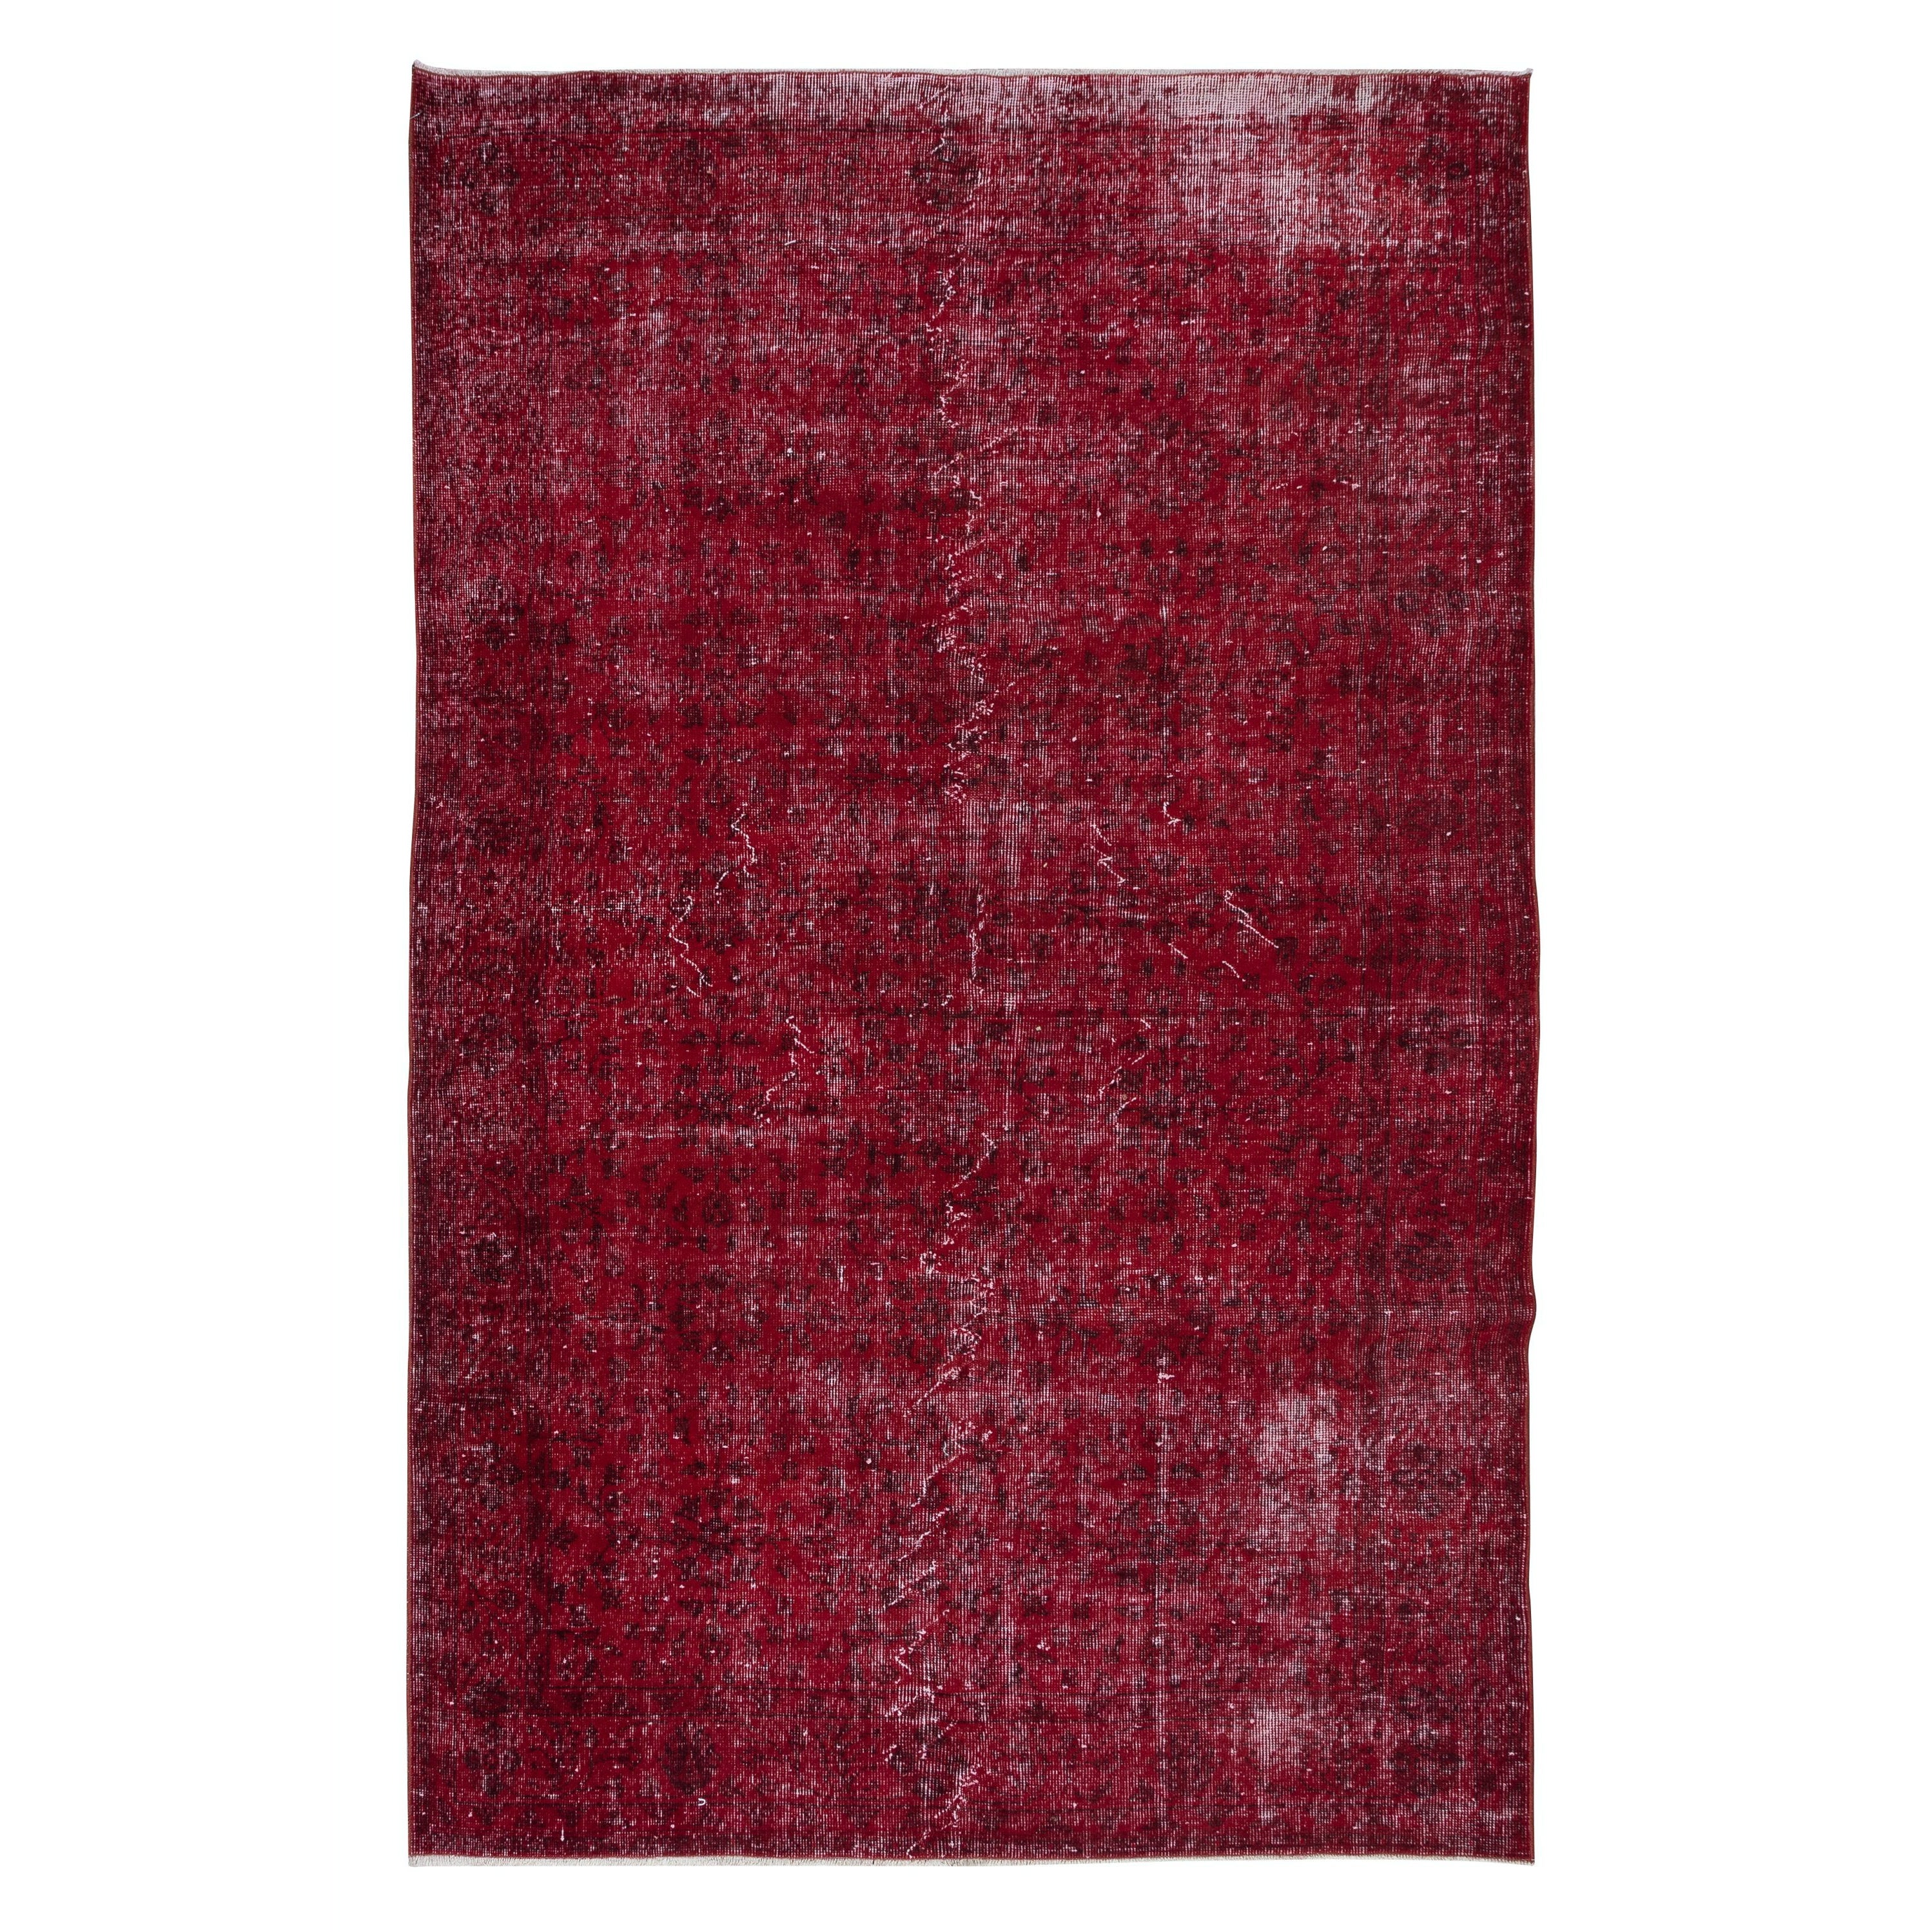 5.7x9 Ft Contemporary Wool Area Rug in Red, Handmade in Turkey